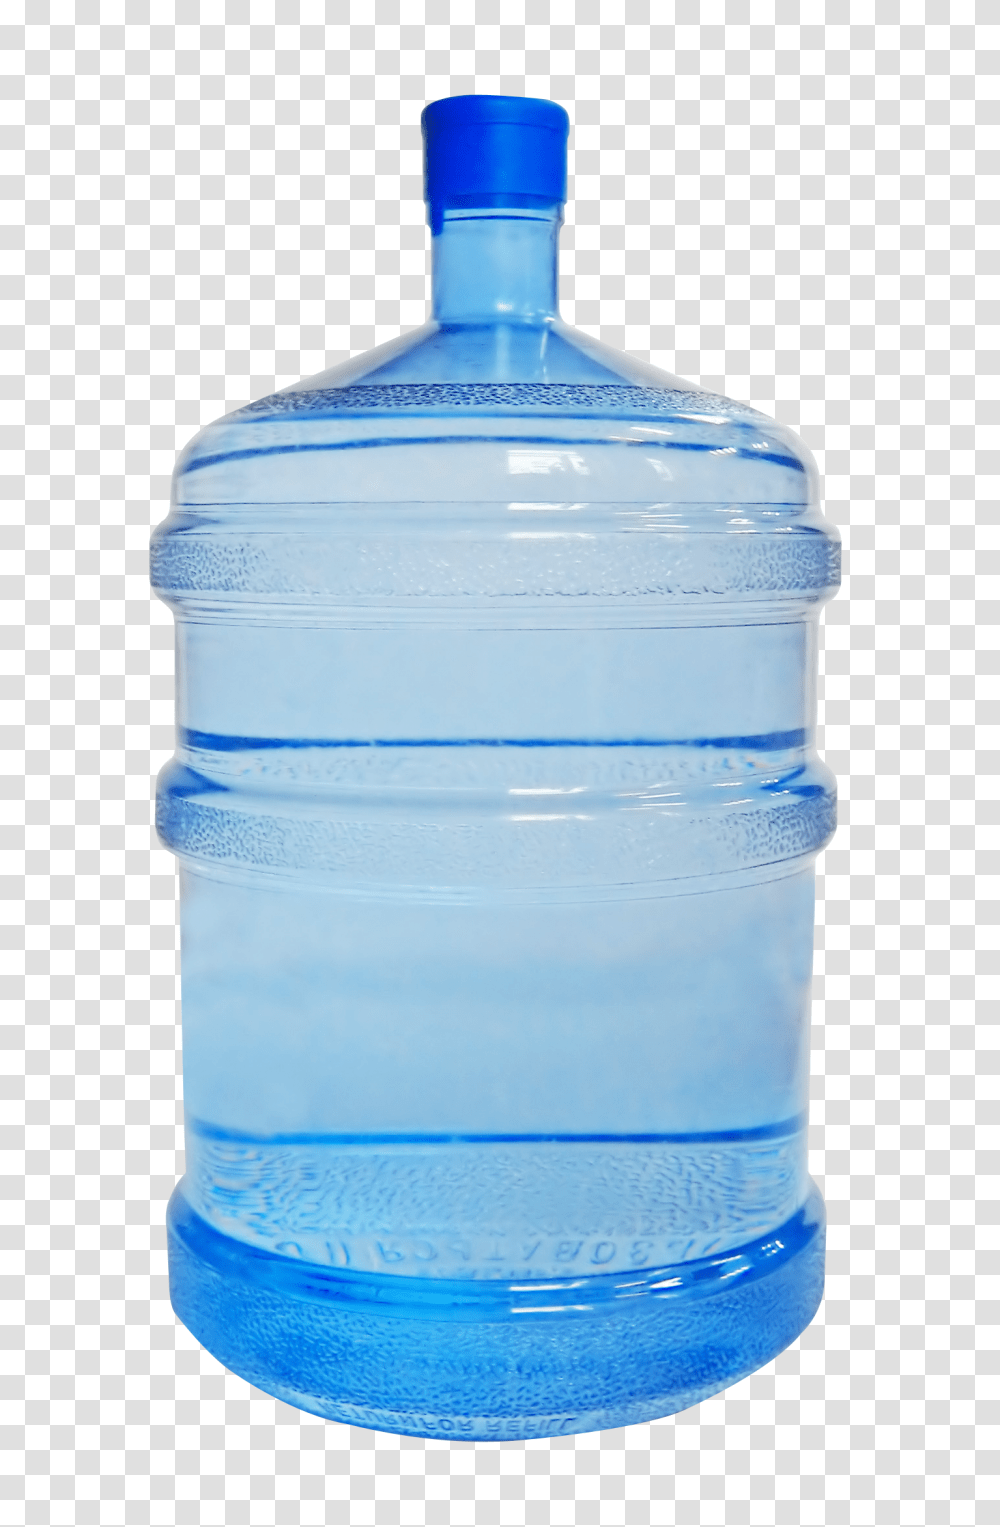 Water Can Image, Bottle, Mineral Water, Beverage, Water Bottle Transparent Png